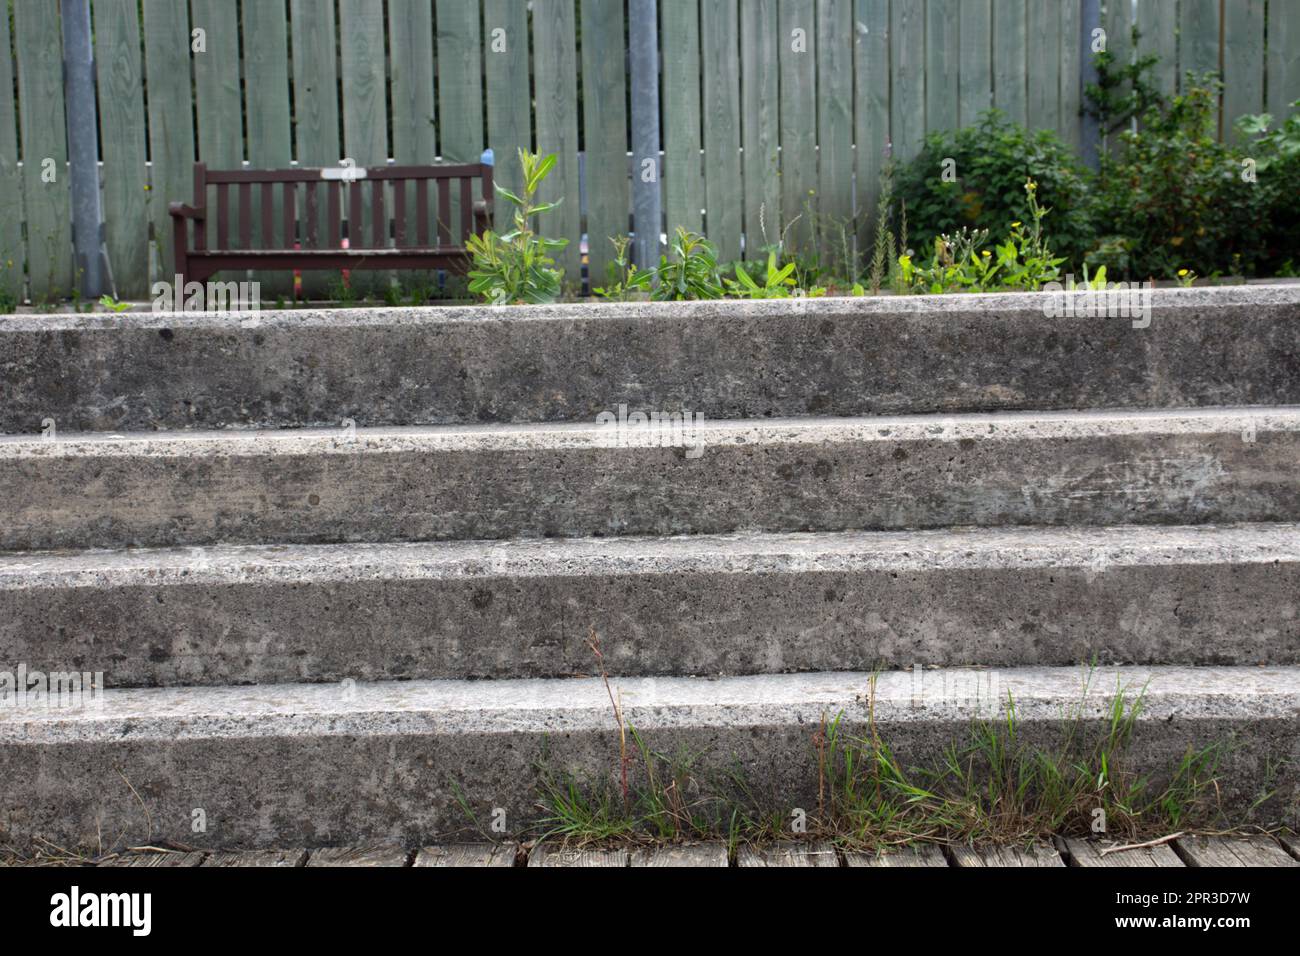 set of four cement steps leading up to a wooden bench with weeds growing Stock Photo